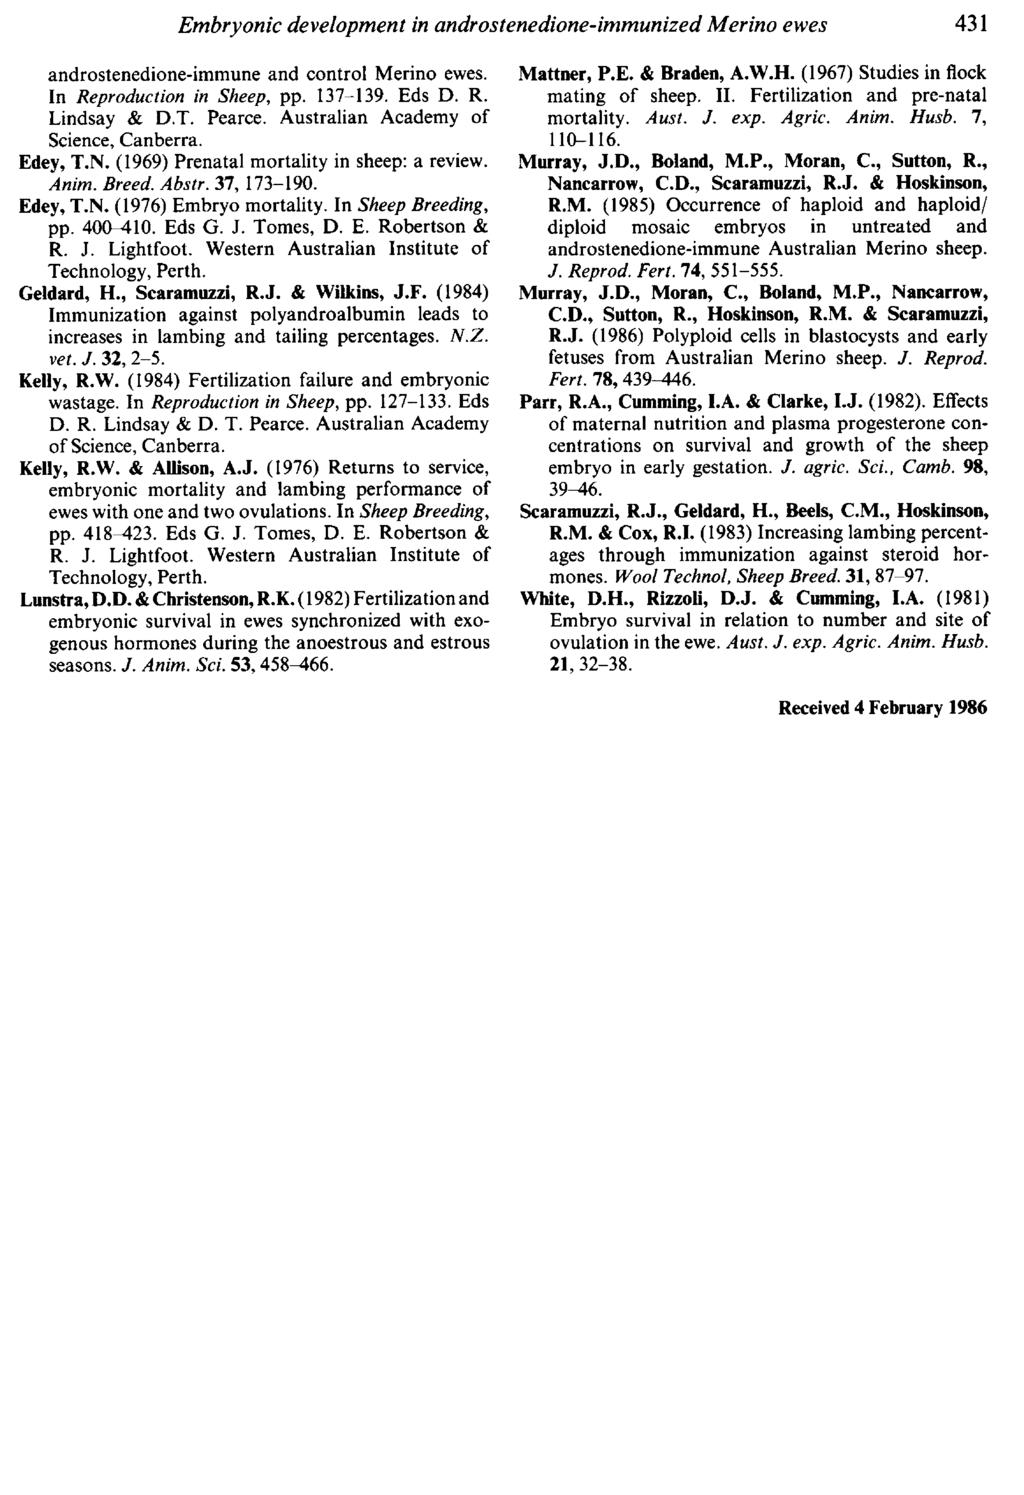 androstenedione-immune and control Merino ewes. In Reproduction in Sheep, pp. 137-139. Eds D. R. Lindsay & D.T. Pearce. Australian Academy of Science, Canberra. Edey, T.N.